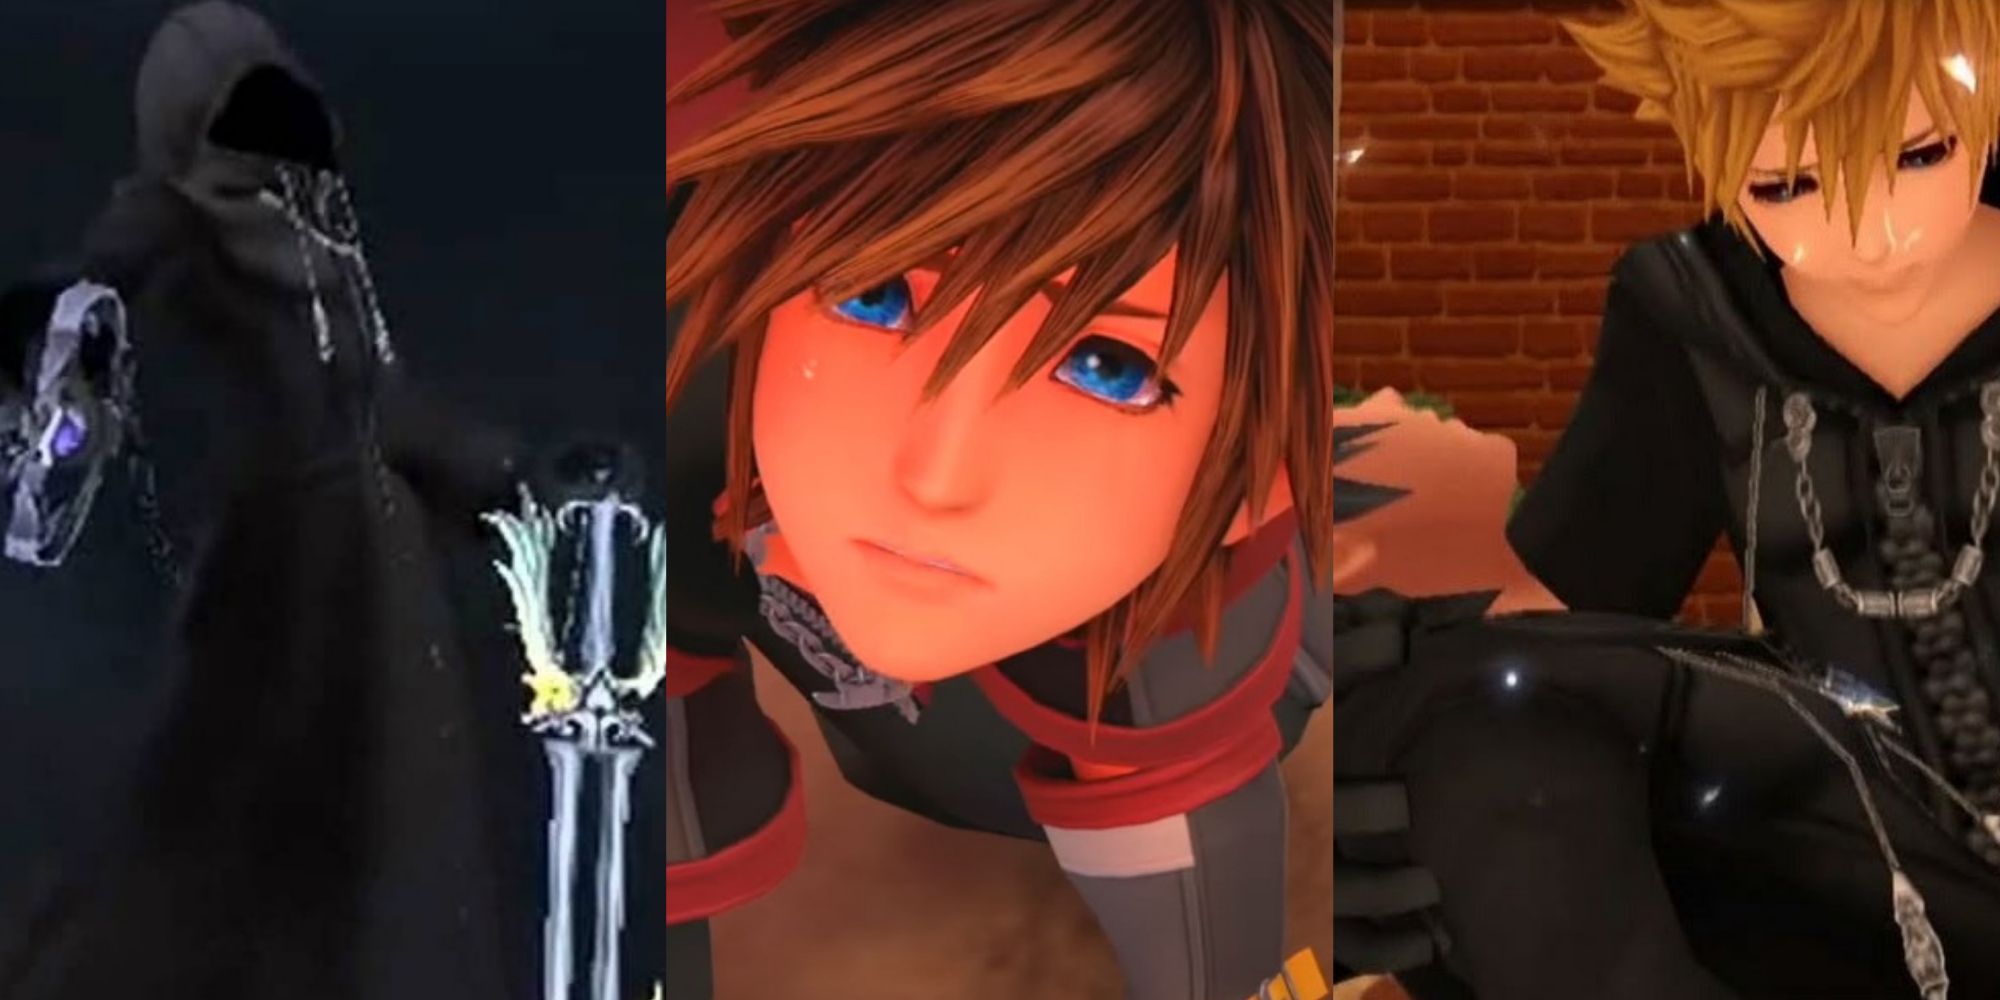 Split image screenshots of Roxas during his fight with Sora in Kingdom Hearts 2, Sora crying in Kingdom Hearts 3 and Roxas holding Xion in Kingdom Hearts 358/2 Days.